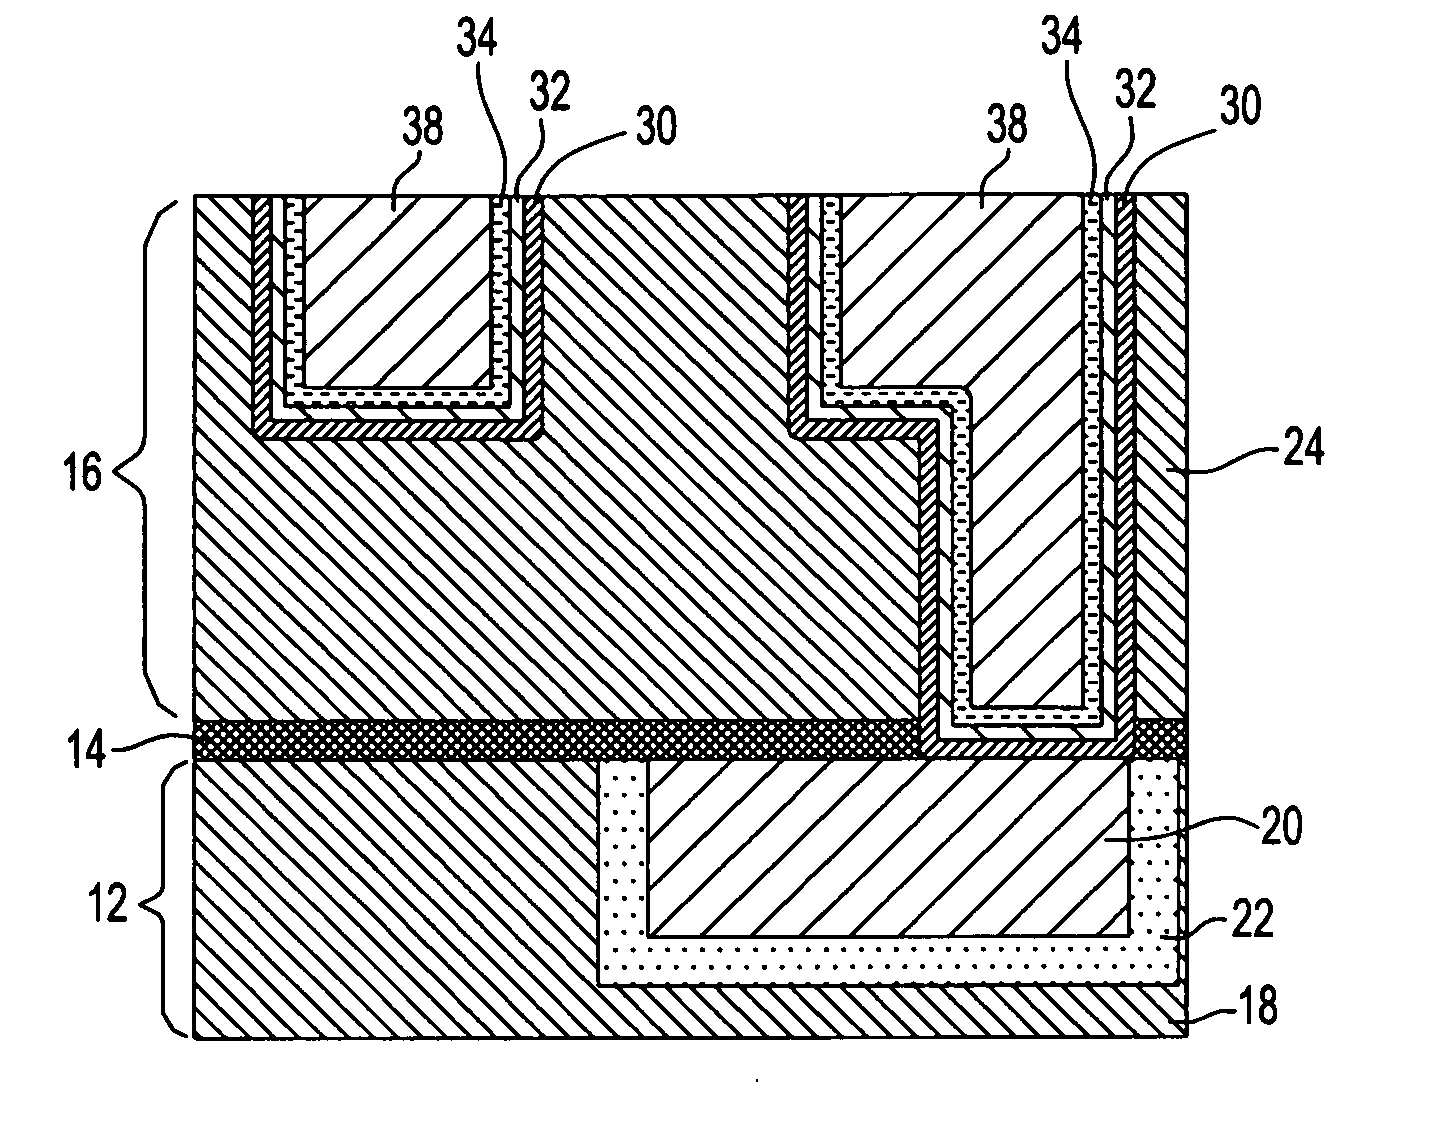 Grain growth promotion layer for semiconductor interconnect structures